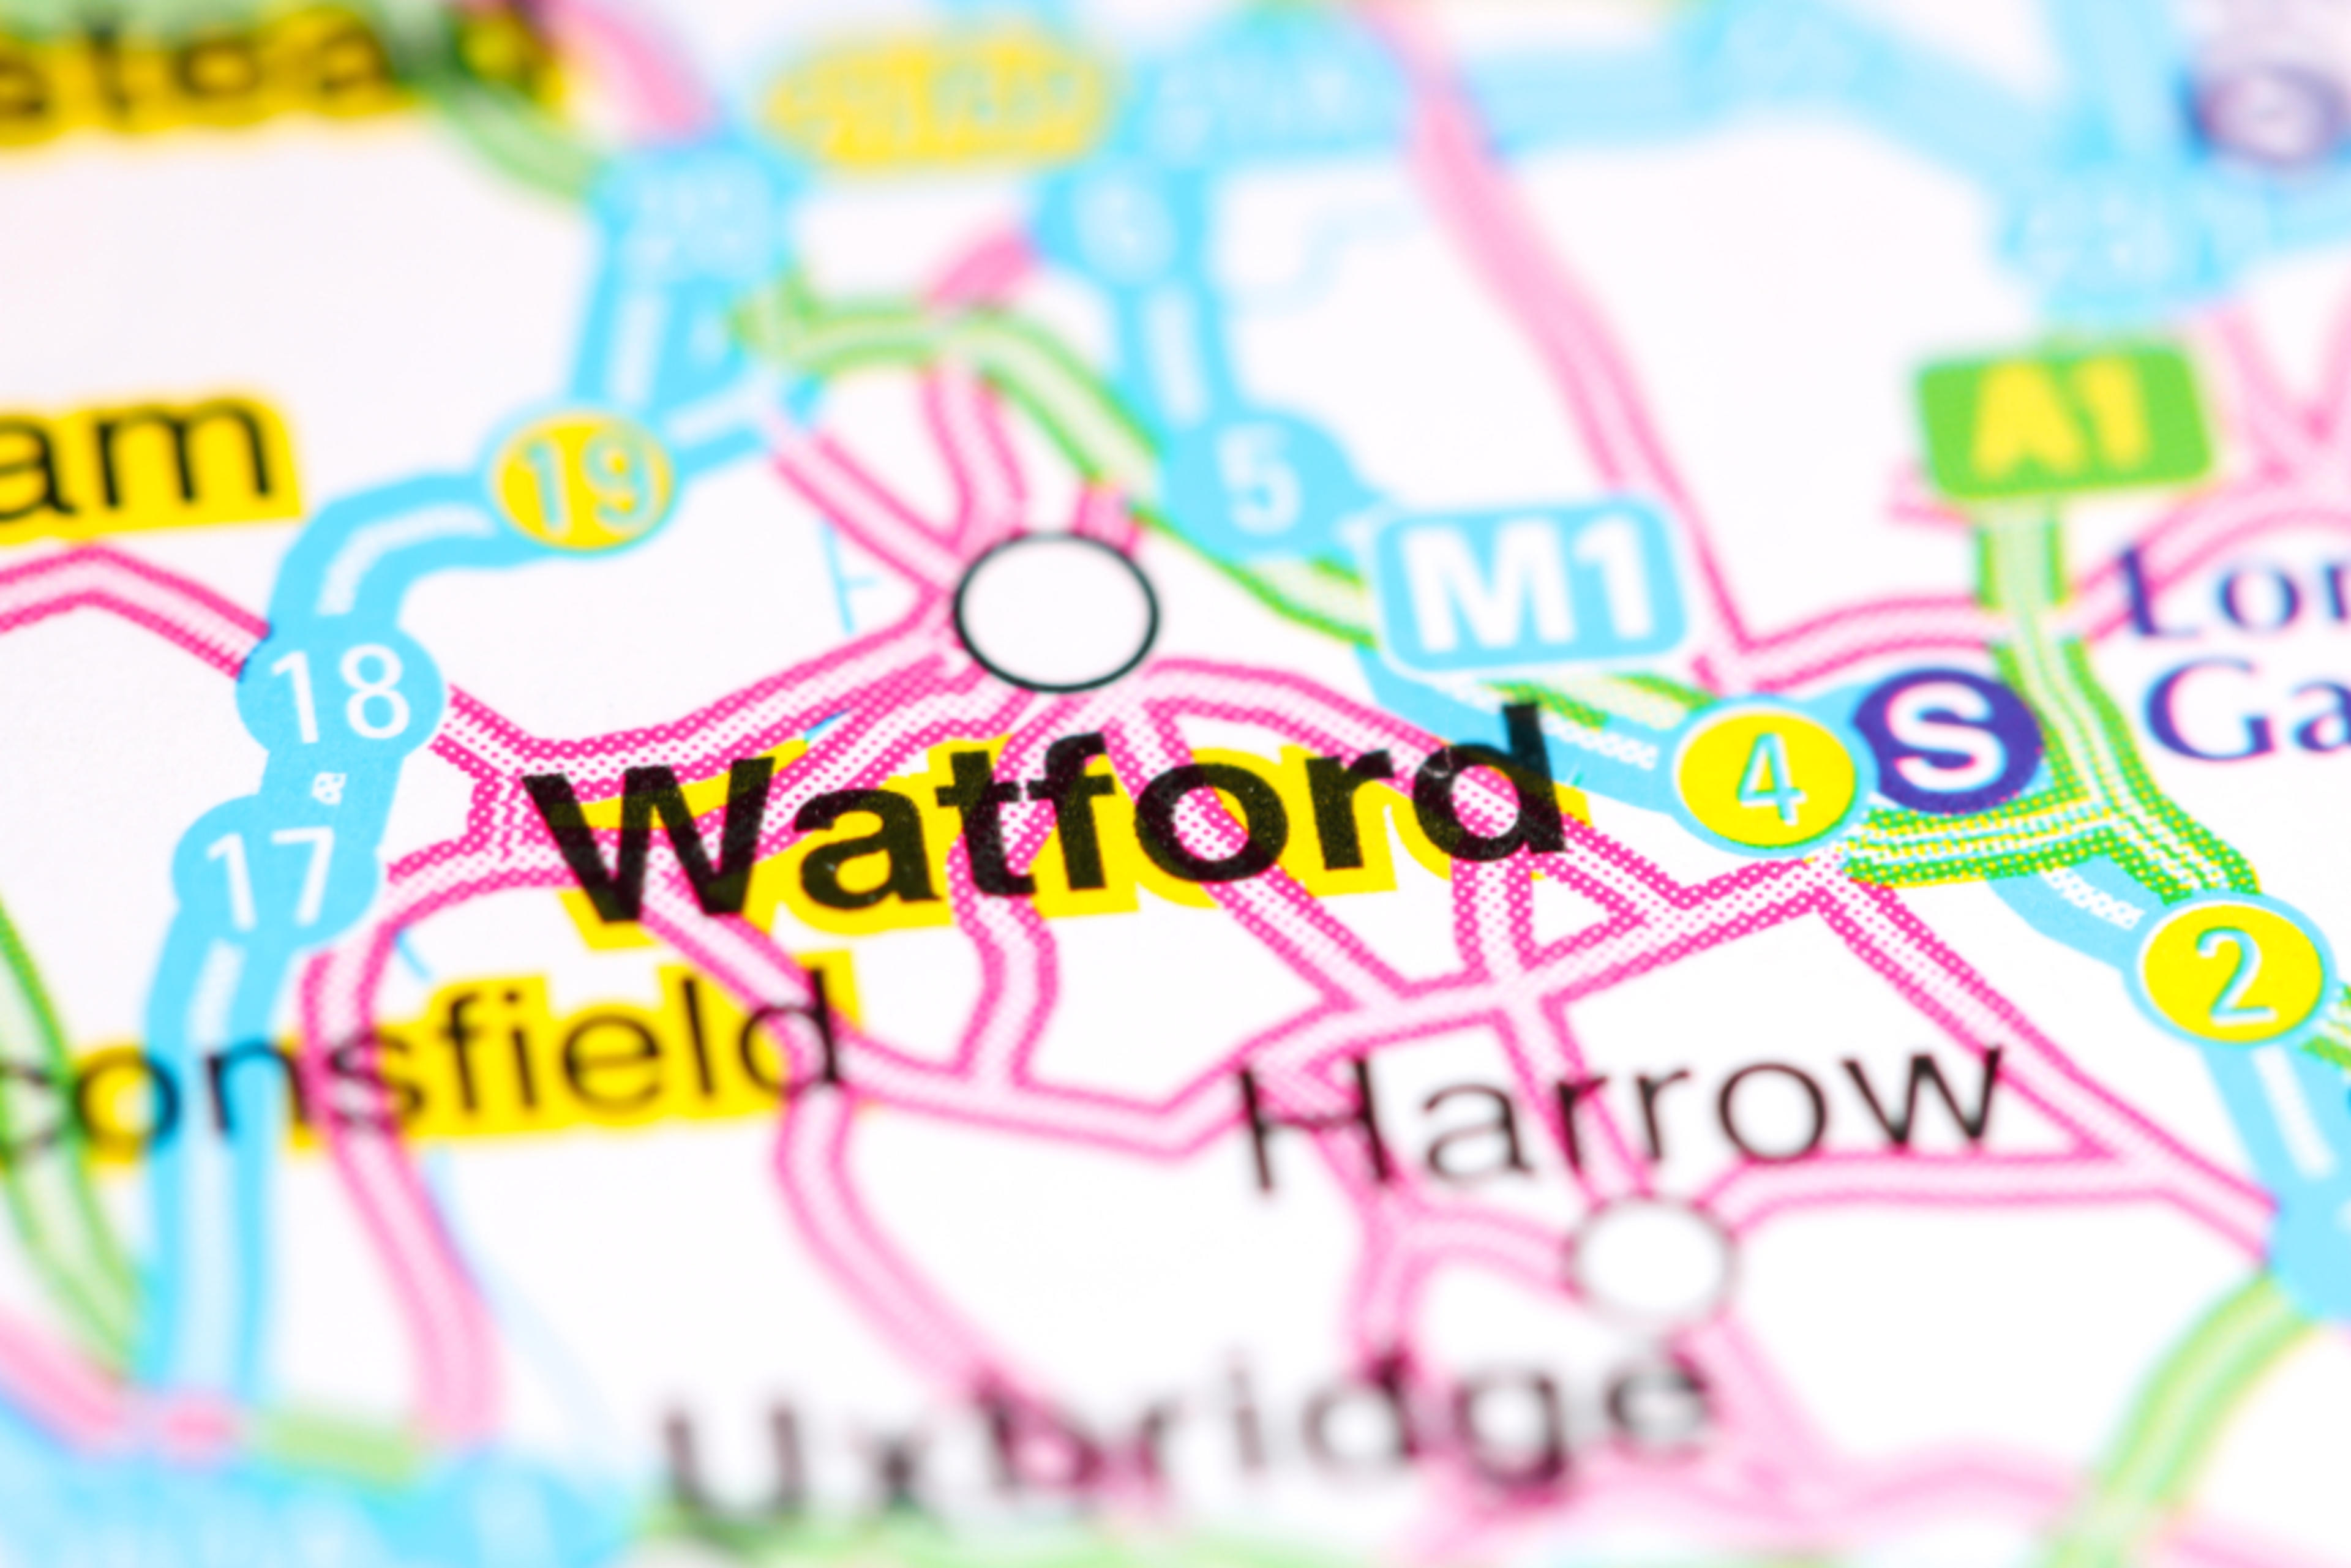 Watford on a map